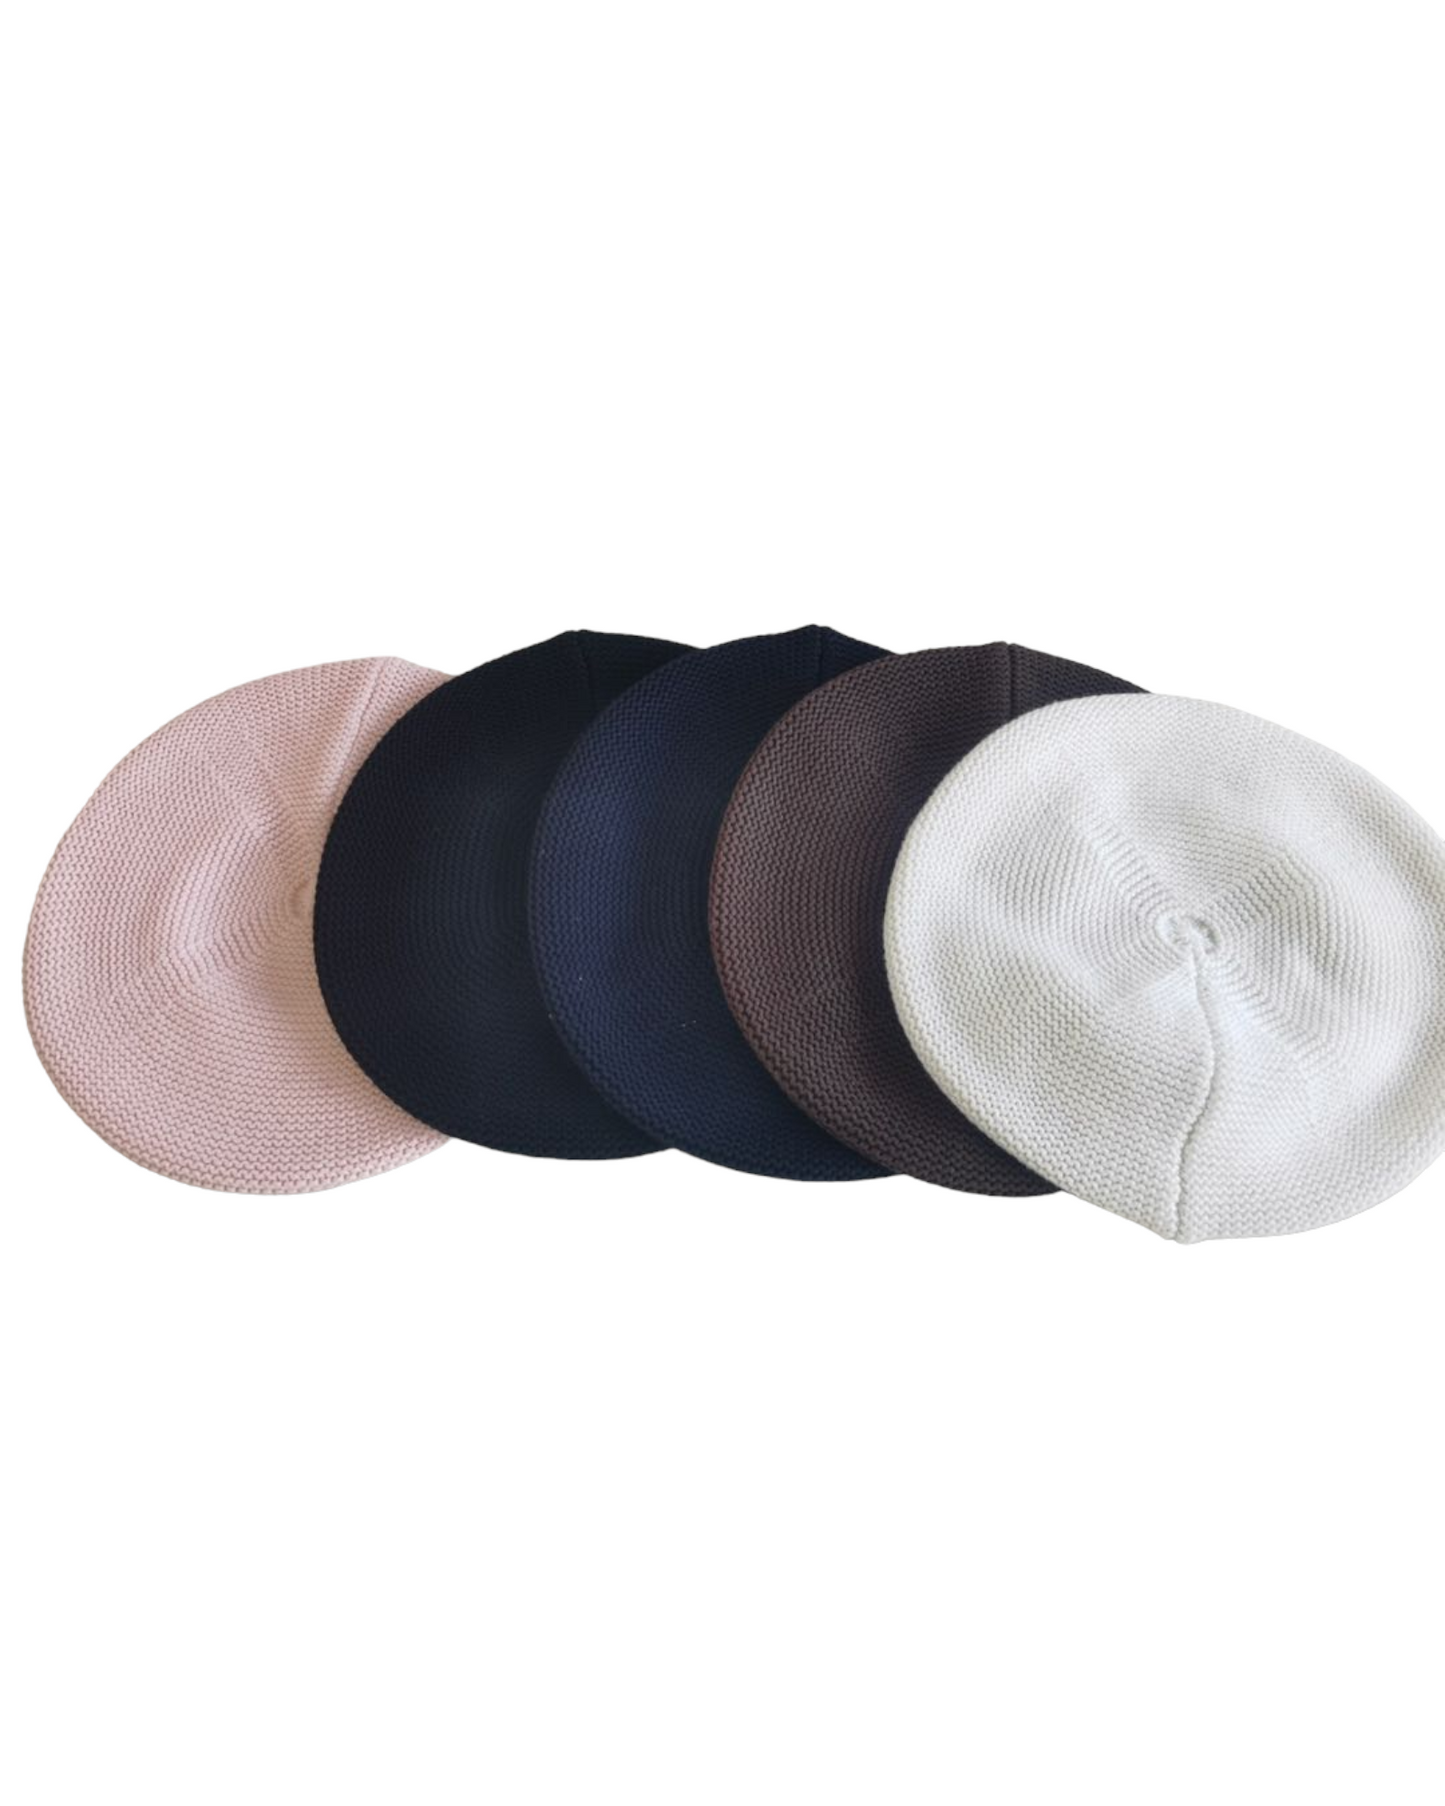 Fully Knitted Cotton French Berets - Keter Hayofi Mitpachot